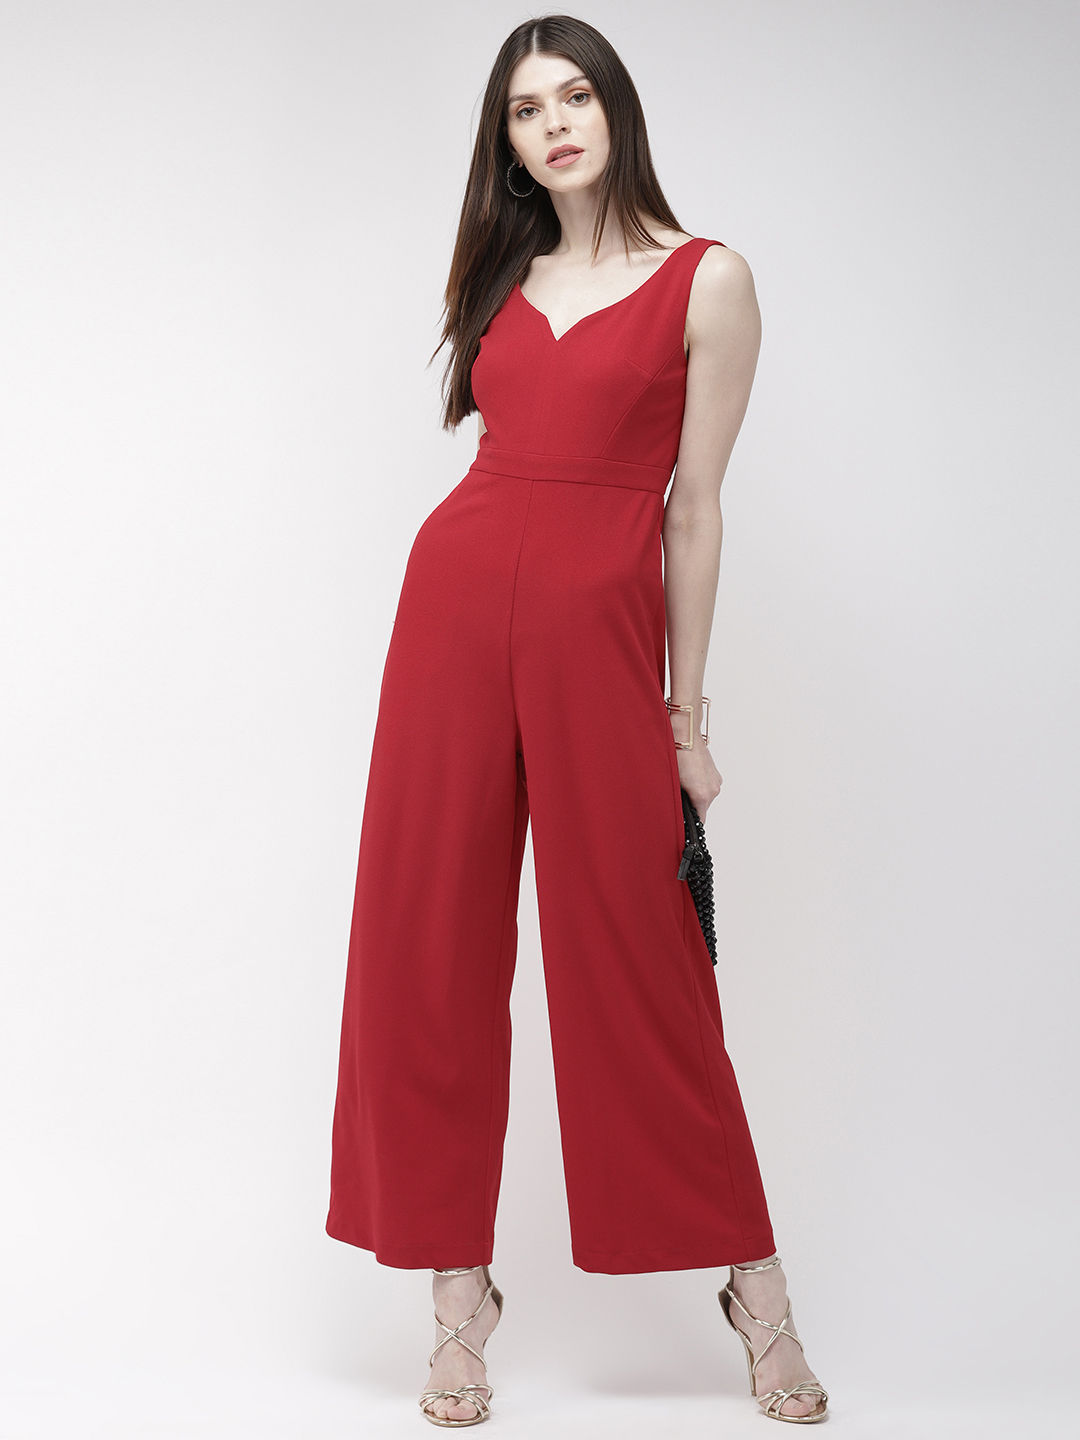 buy red jumpsuit